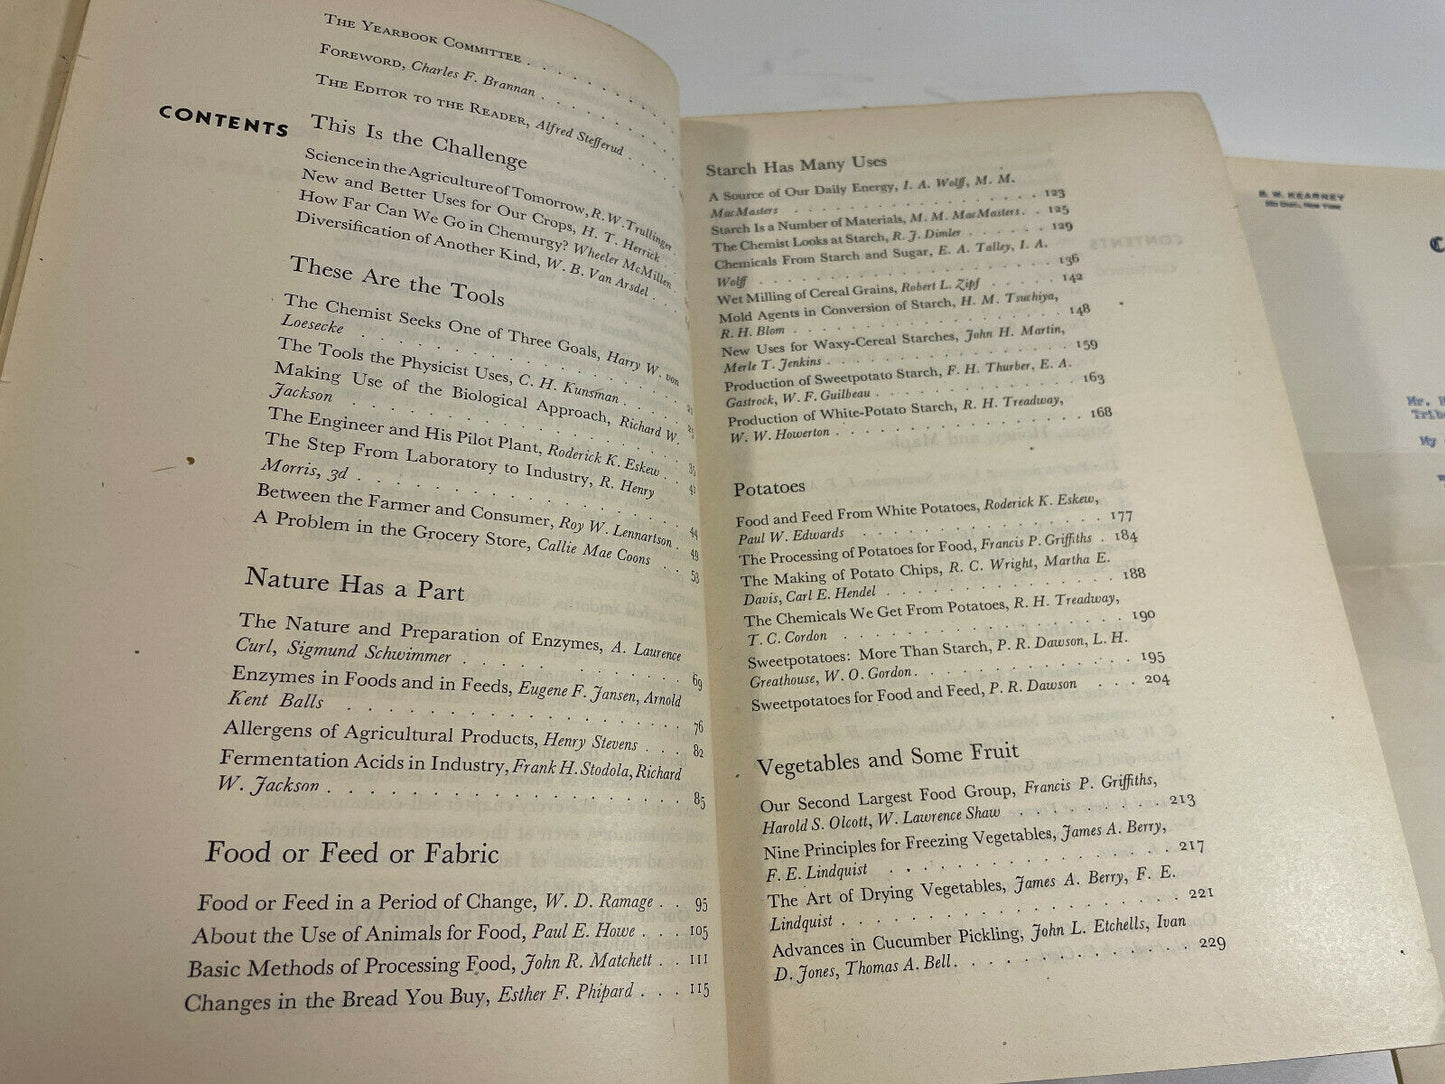 Crops In Peace and War: Yearbook of Agriculture 1950-1951